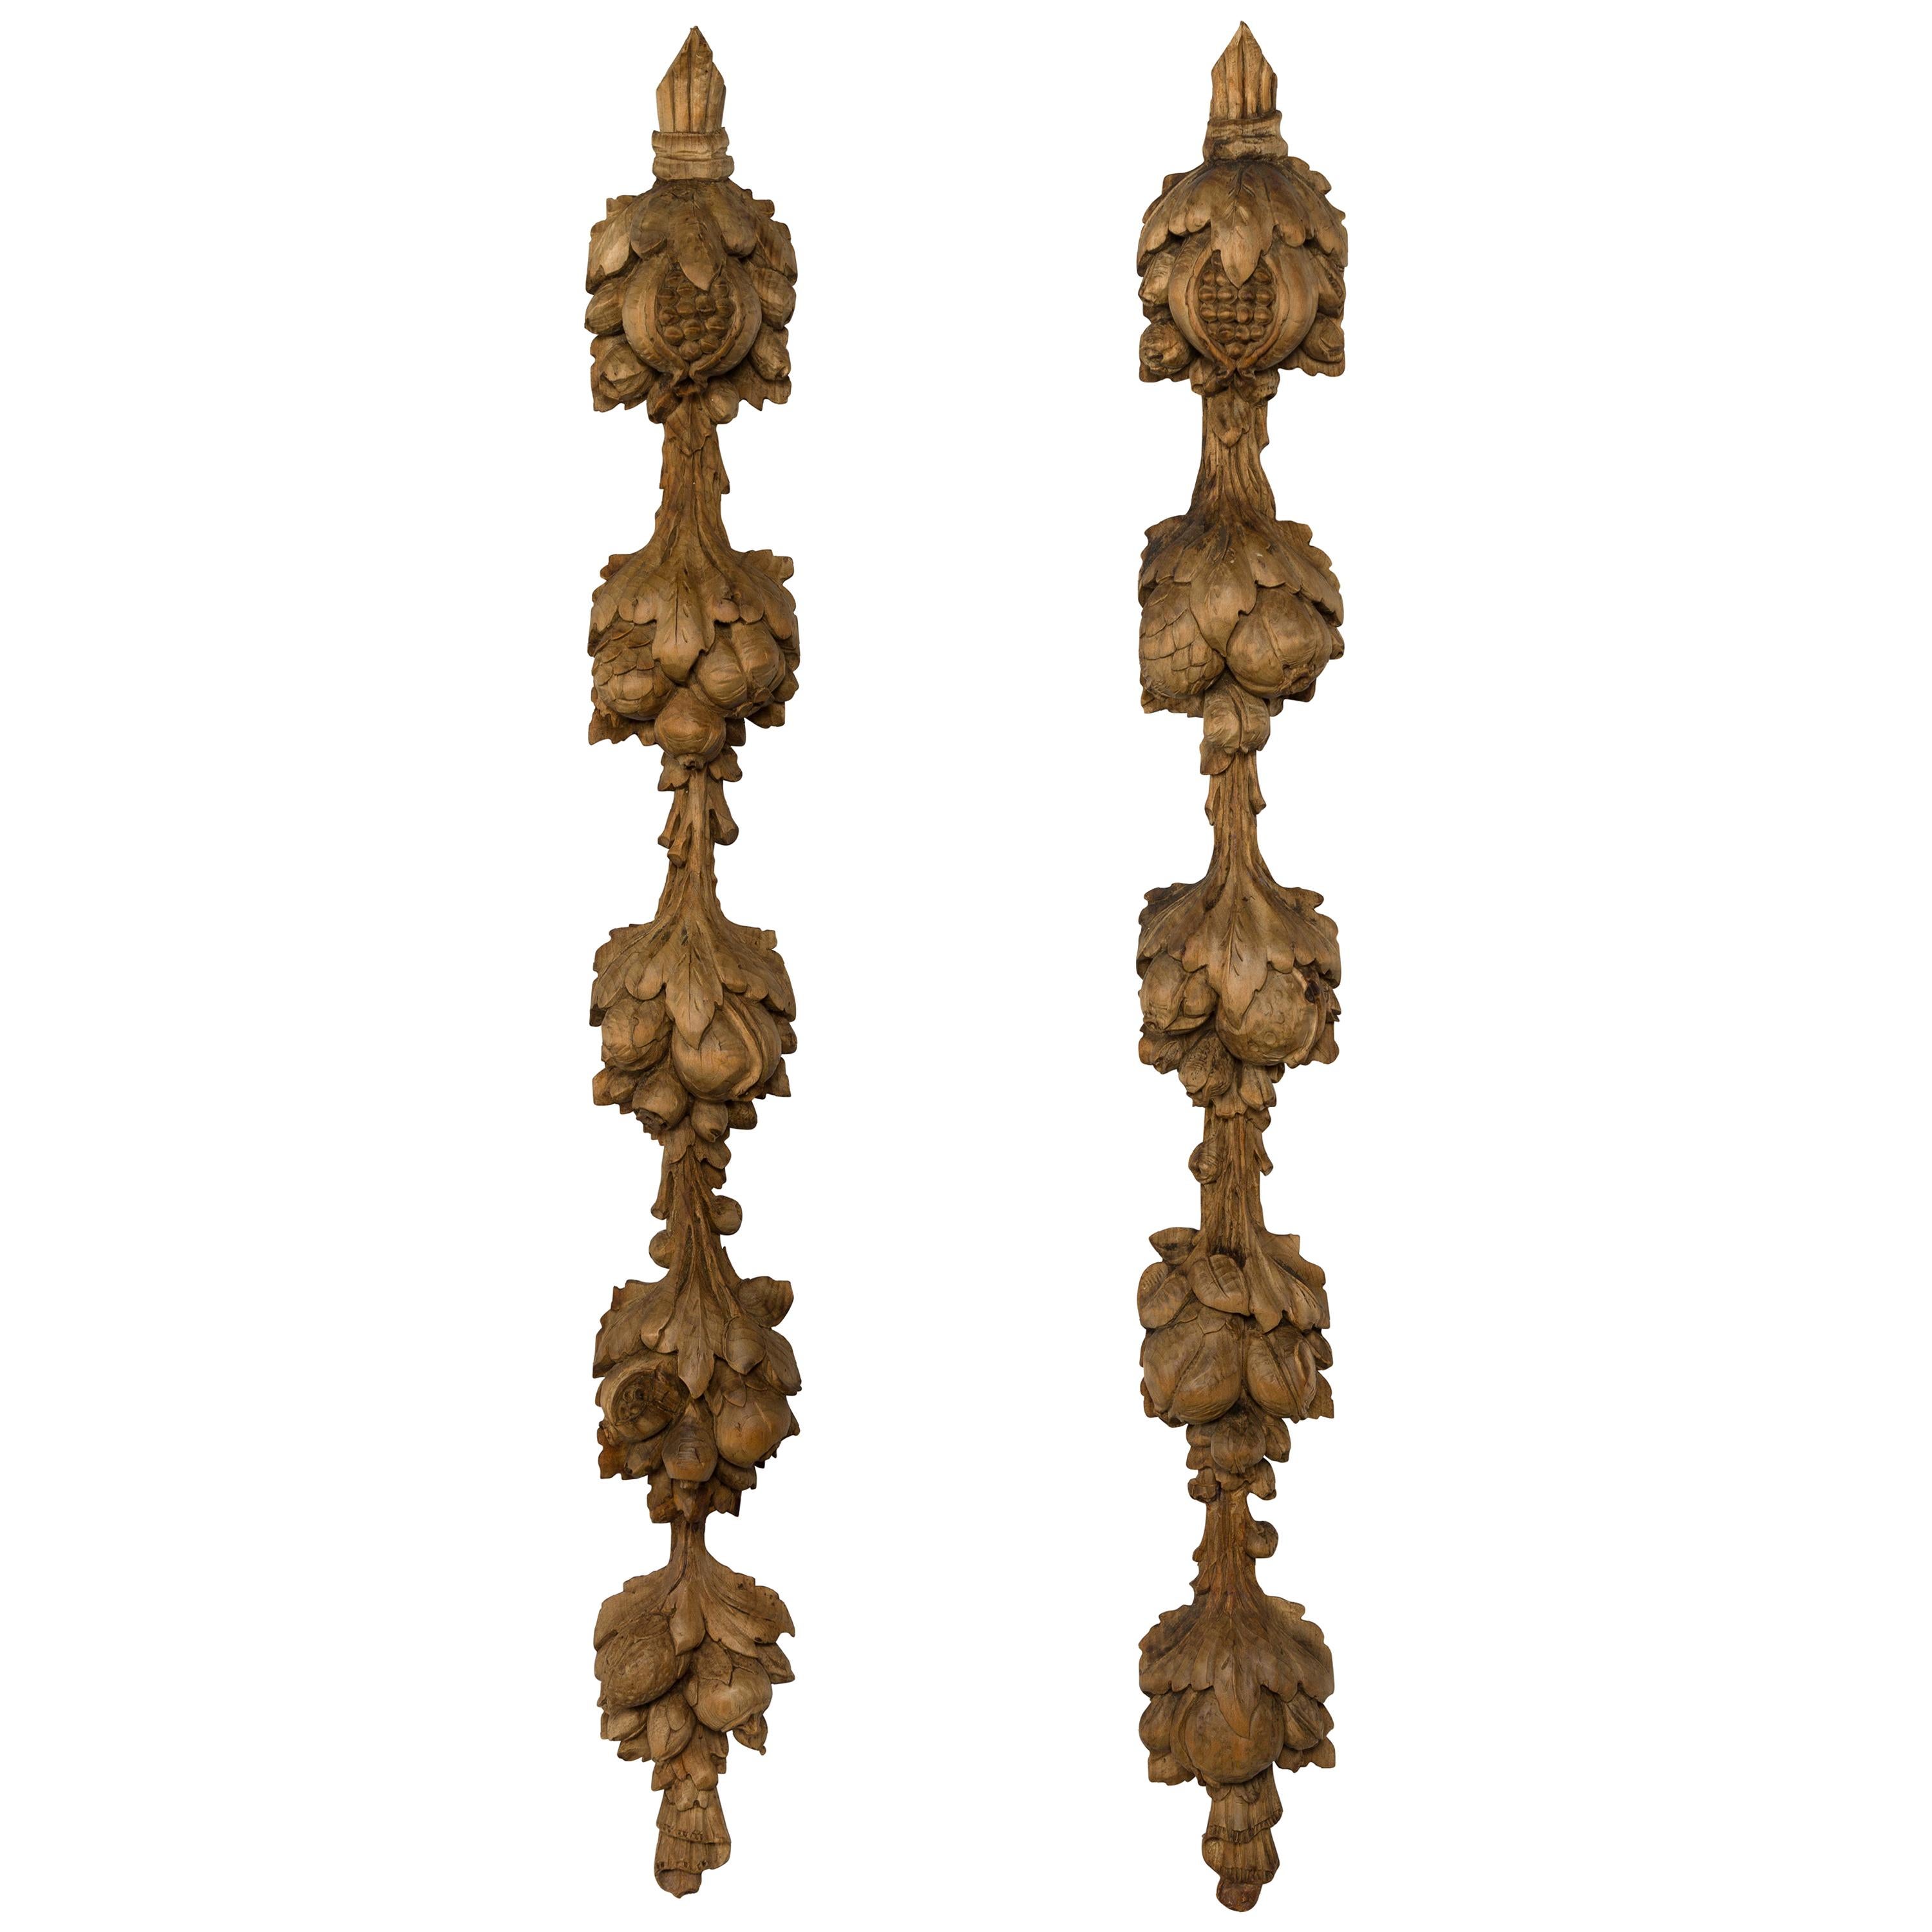 Pair of 1880s Italian Carved Wooden Wall Carvings Depicting Pomegranates For Sale